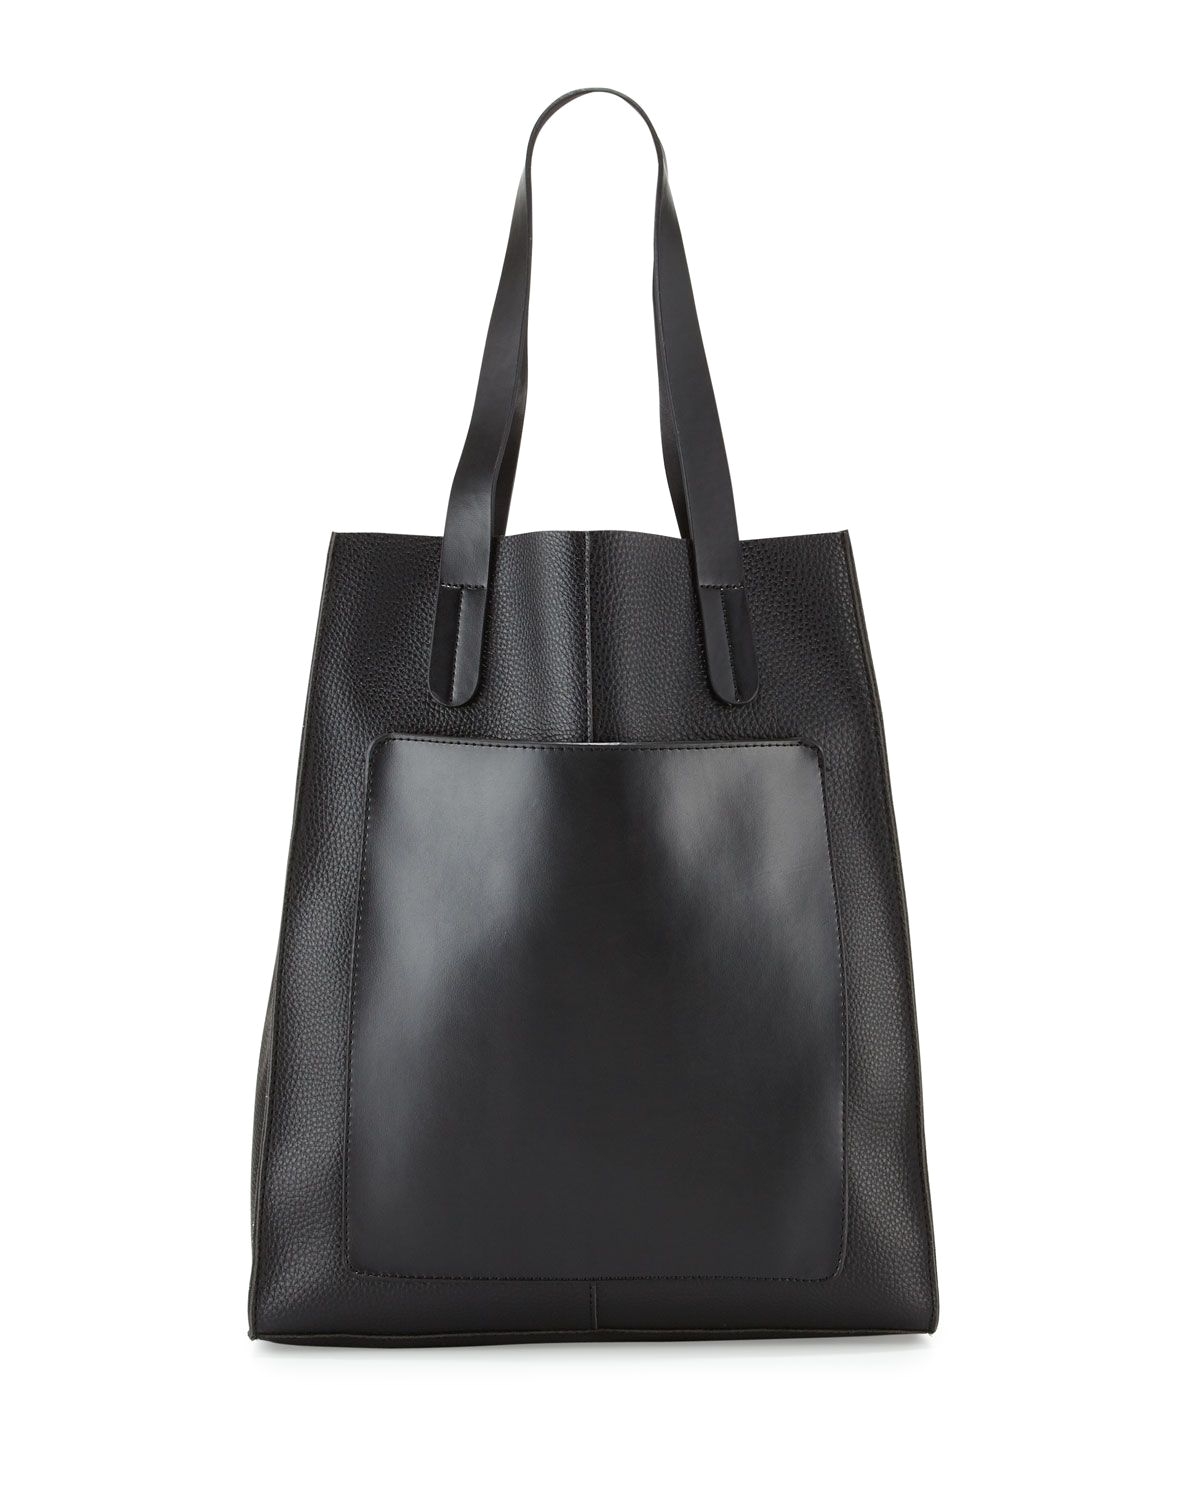 shop large leather tote bag black from neiman marcus at neiman marcus last call where youll save as much as on designer fashions